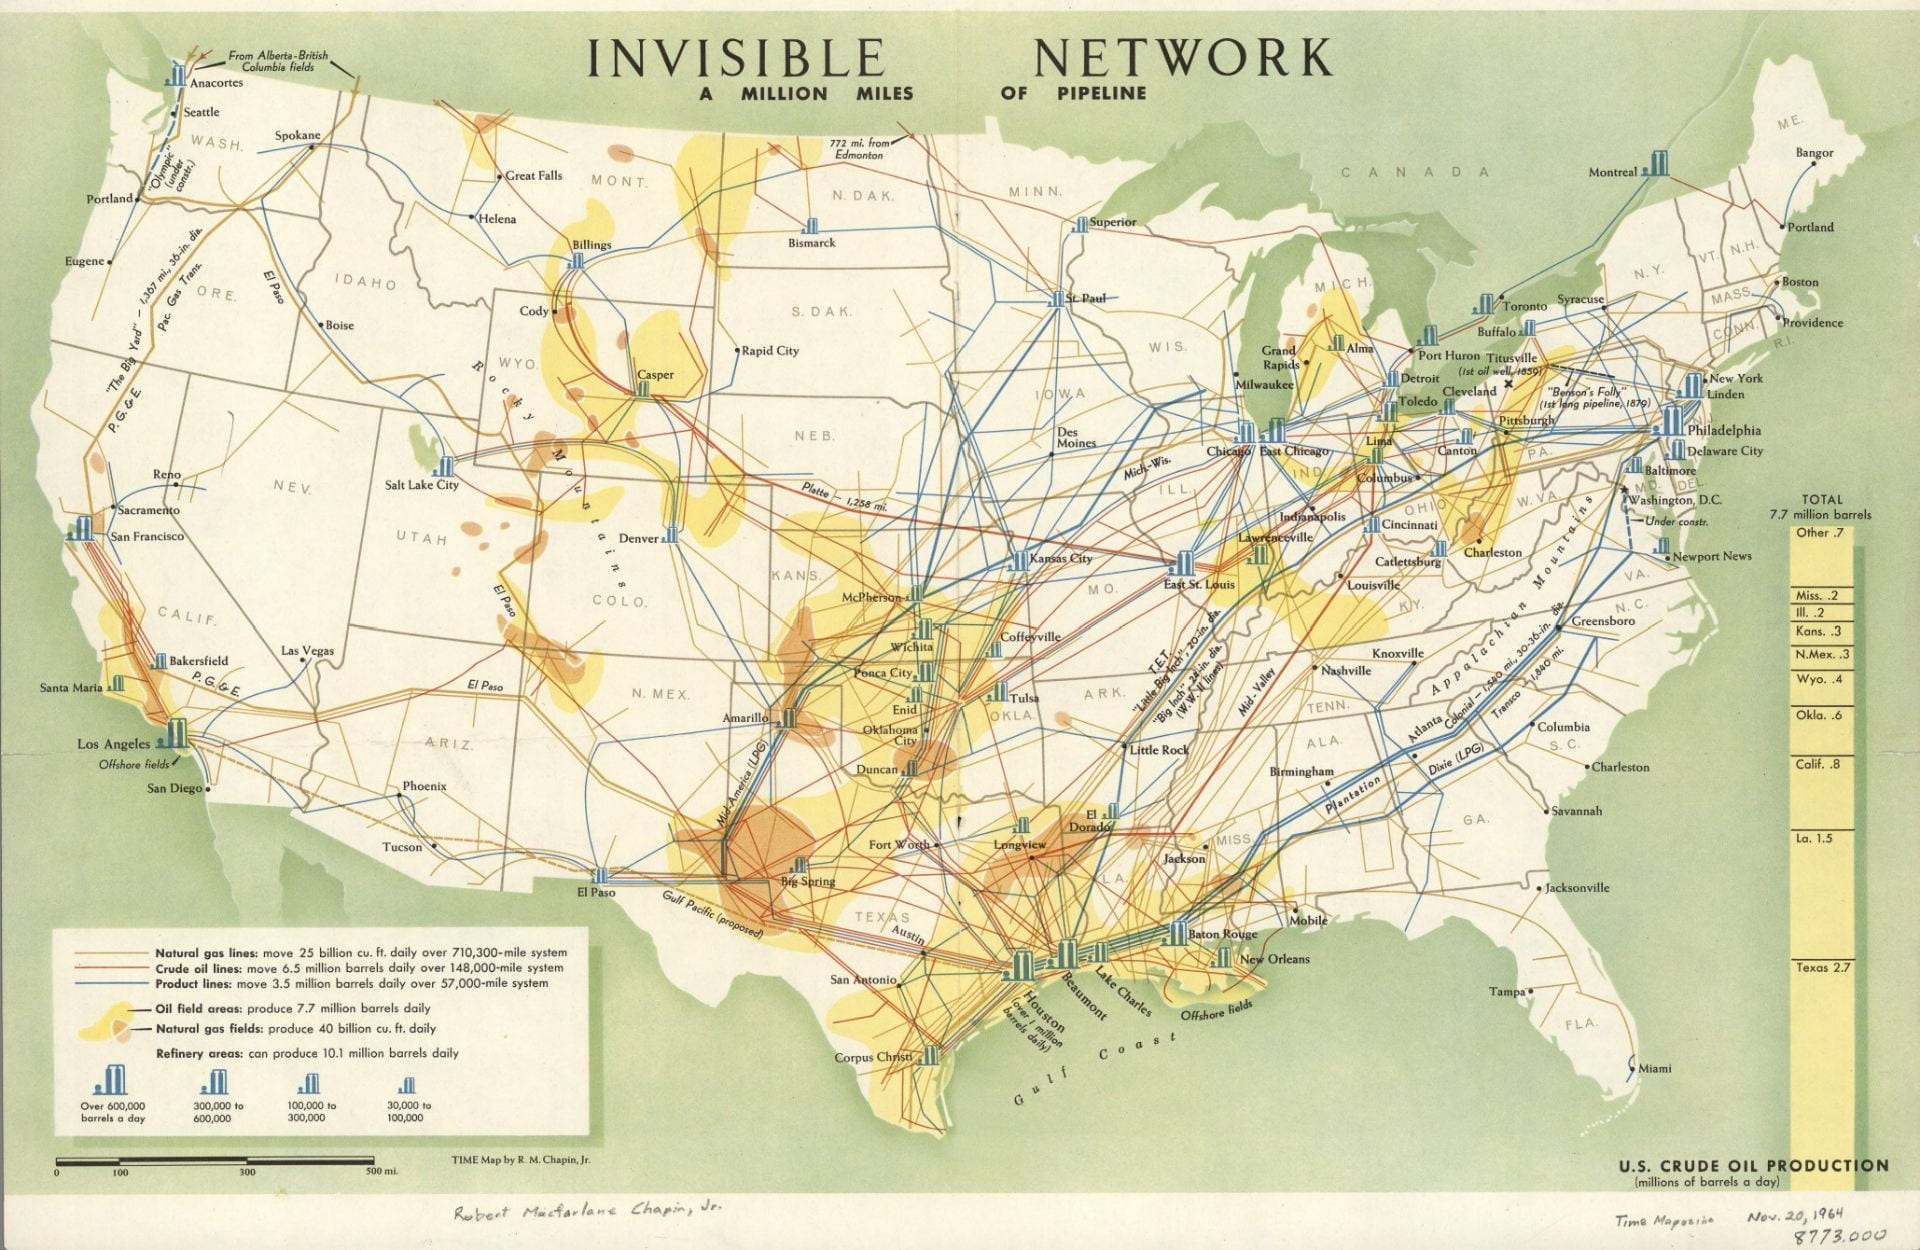 Invisible Network. A Million Miles of Pipeline. TIME Map by R.M. Chapin, Jr.